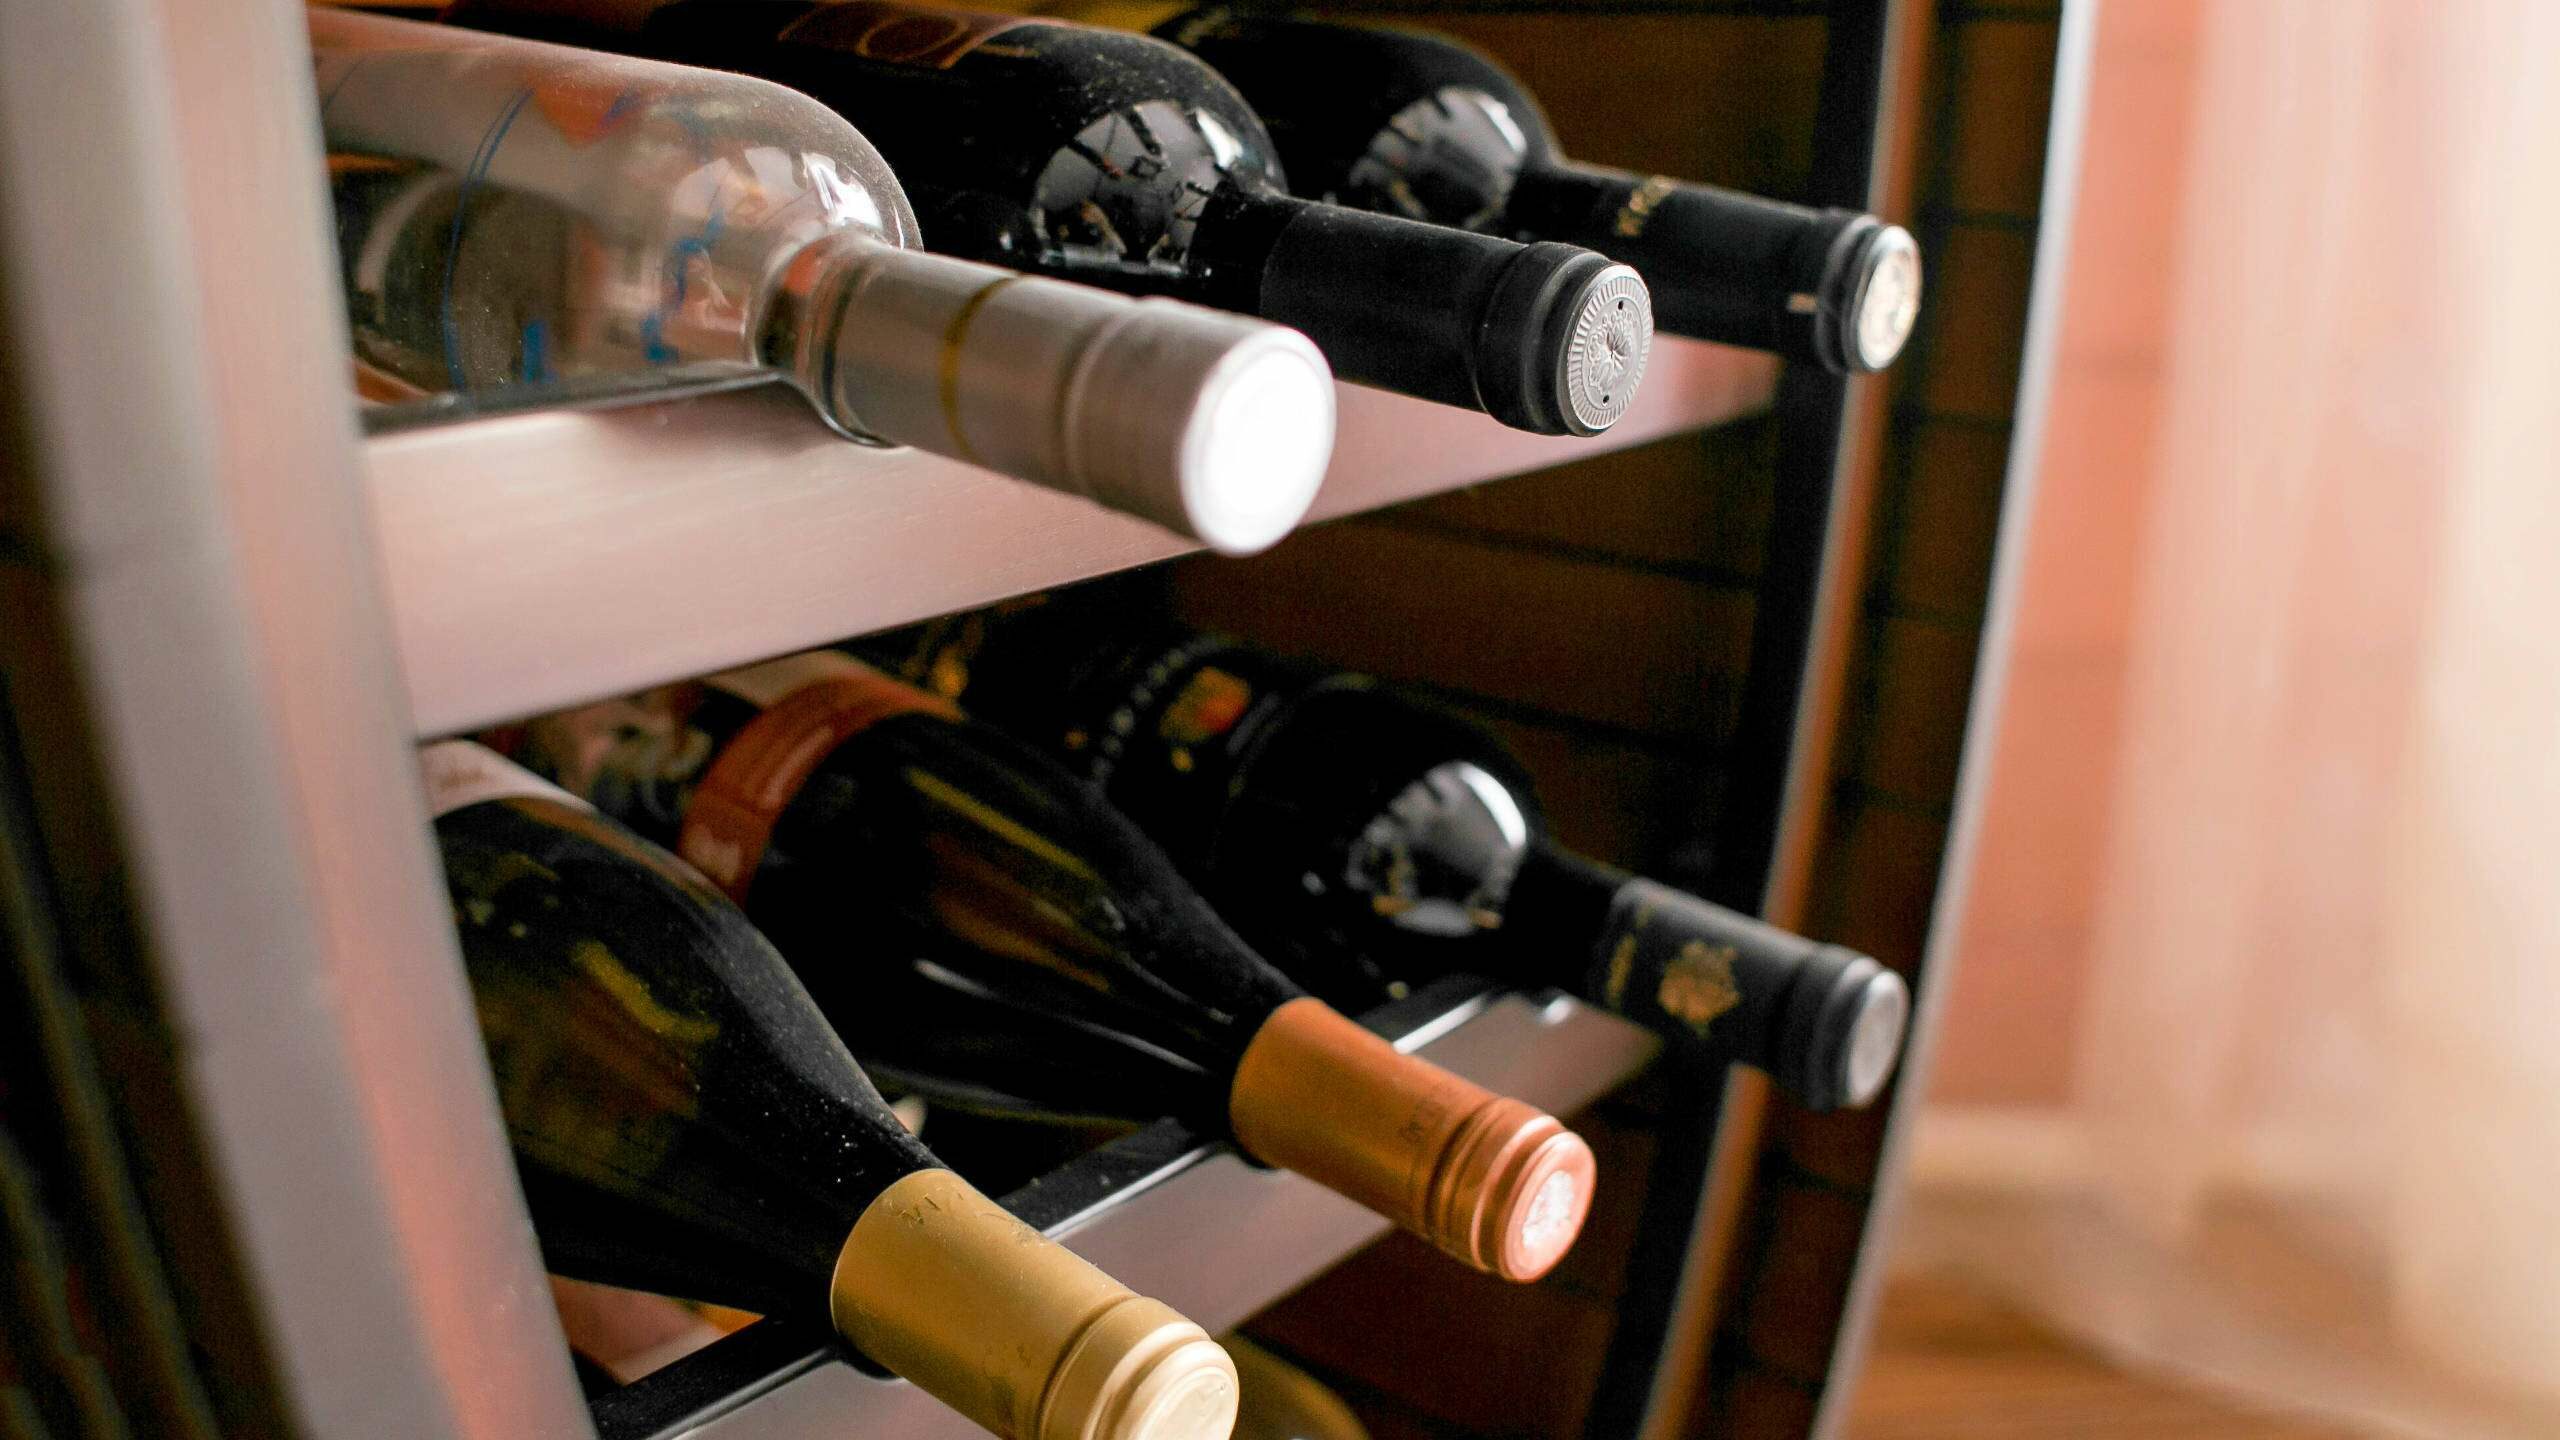 Bottles of white and red wine on a wooden shelf in private winery cabinet room interior